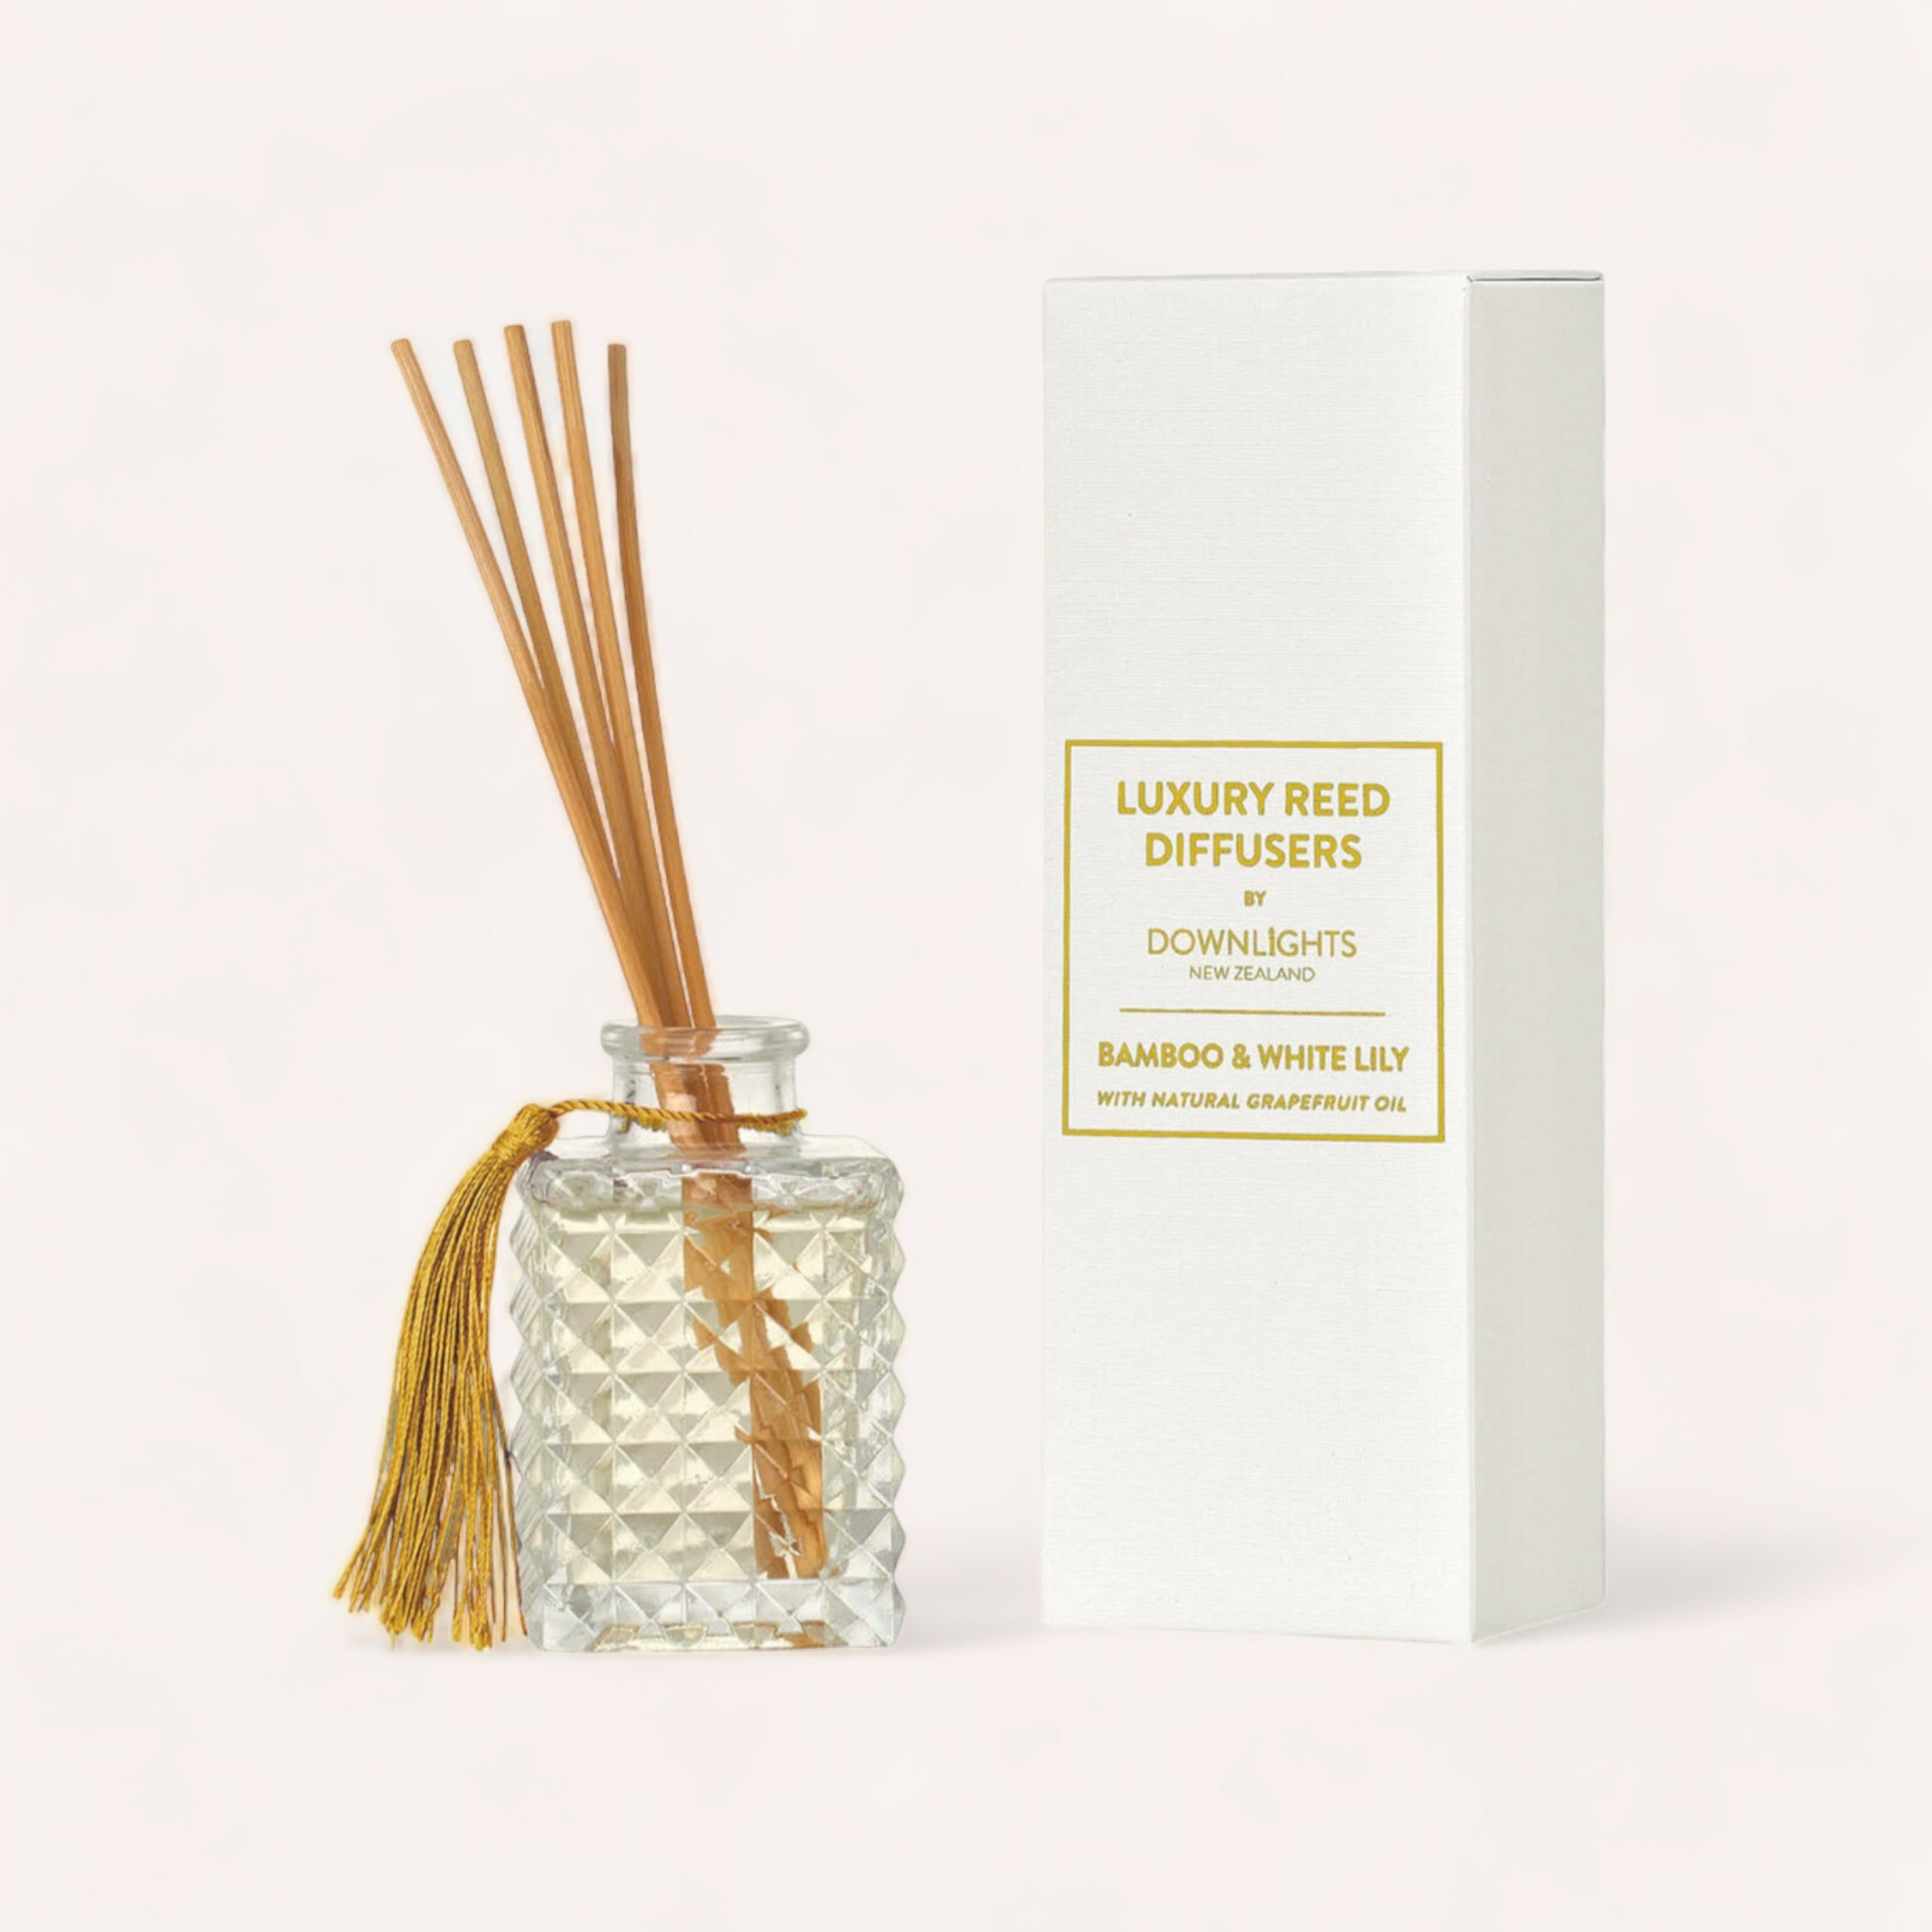 Elegant Bamboo & White Lily Diffuser by Downlights, packaged in a minimalist white box with a luxury label, perfect for adding a subtle and sophisticated aroma to any room.